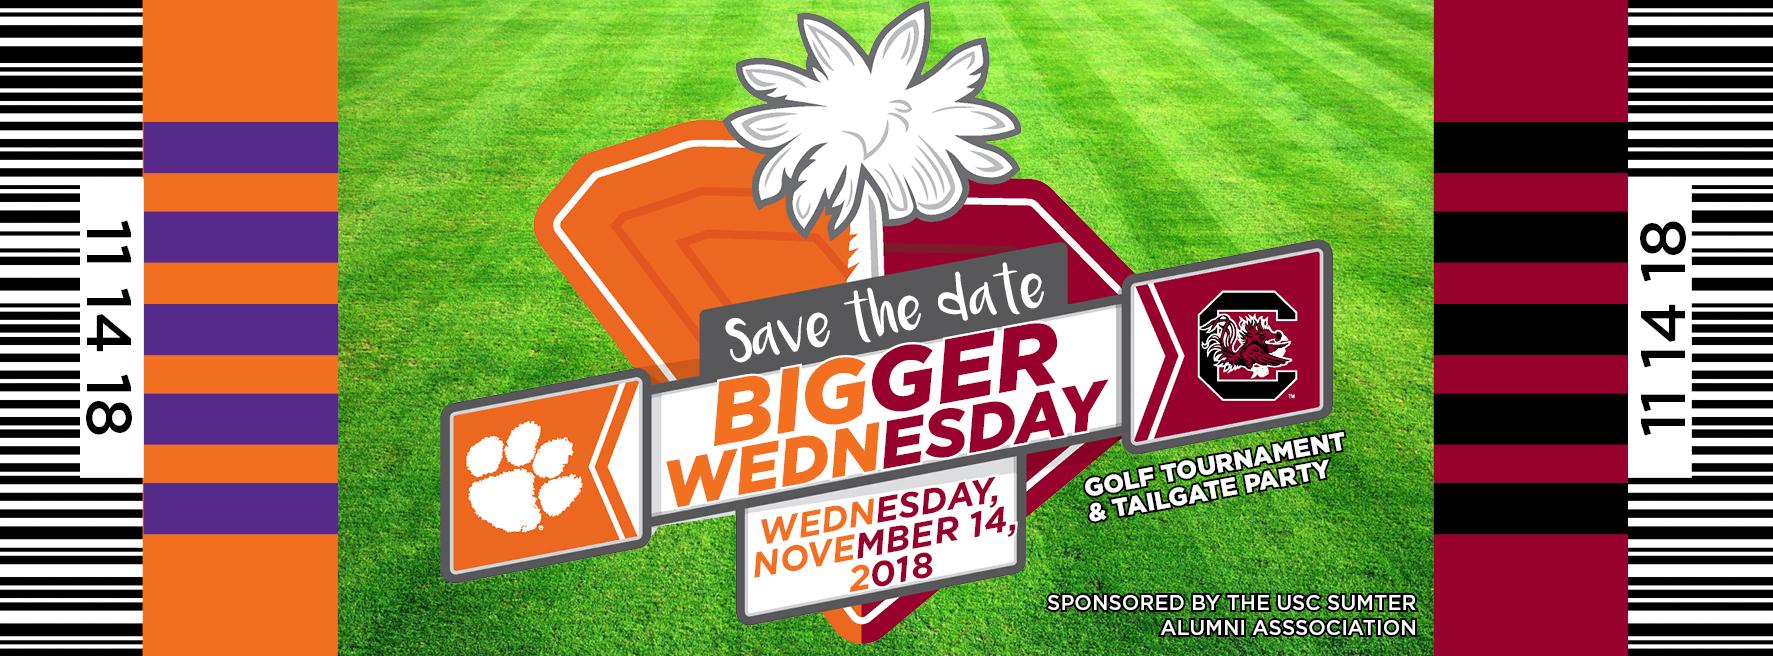 BIGGER Wednesday Golf Tournament & Tailgate Party